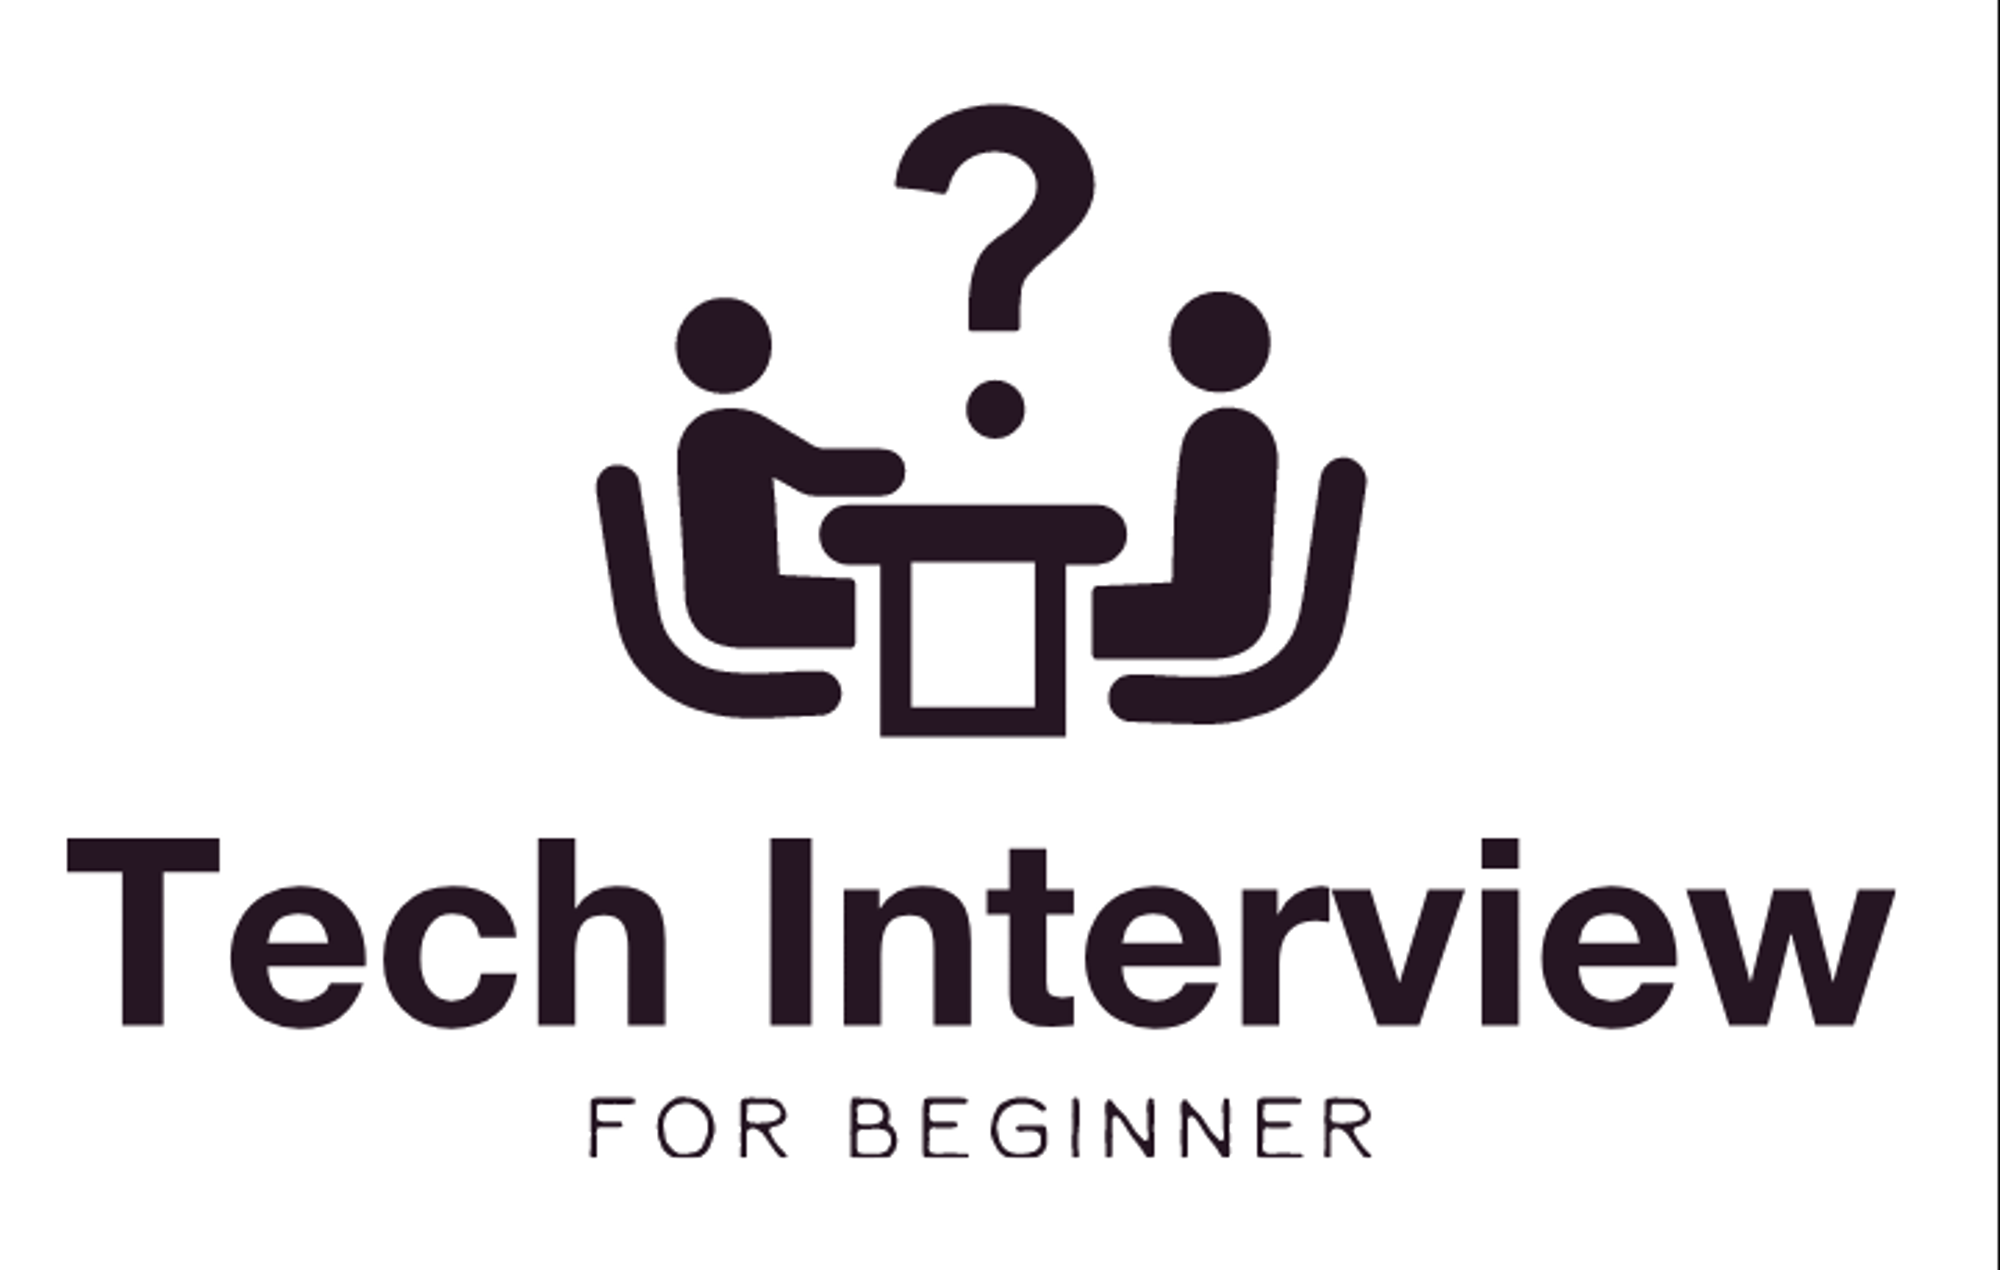 Interview_Question_for_Beginner/FrontEnd at master · JaeYeopHan/Interview_Question_for_Beginner